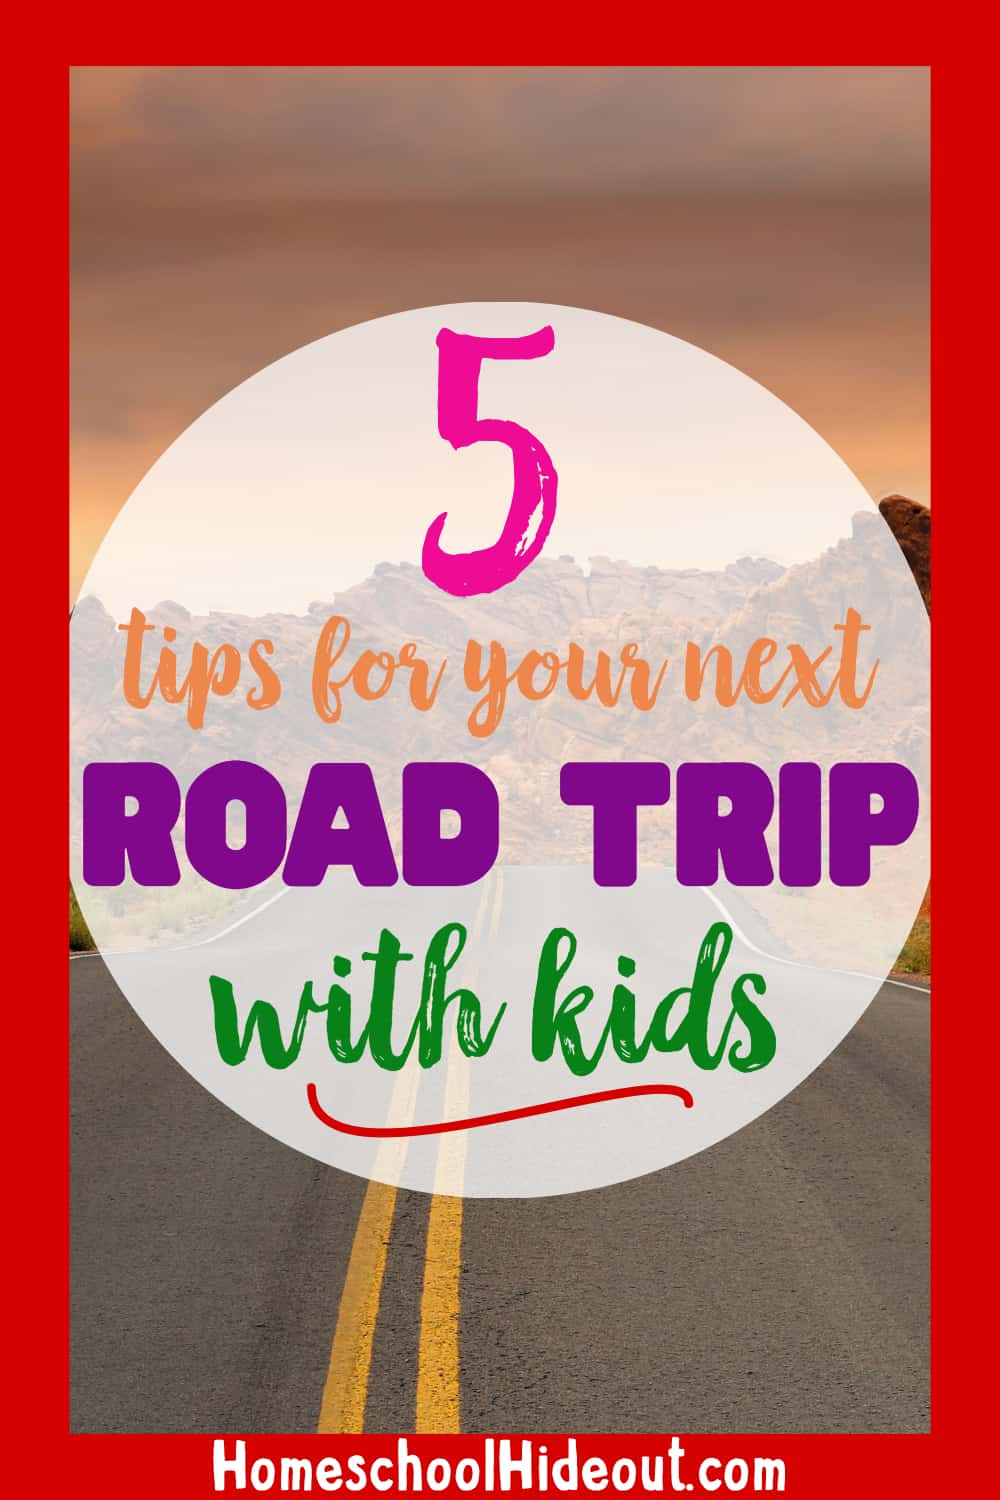 Taking a road trip with kids can be the best days of your life with these 5 tips! #travel #travelingwithkids #roadtrip #makingmemories